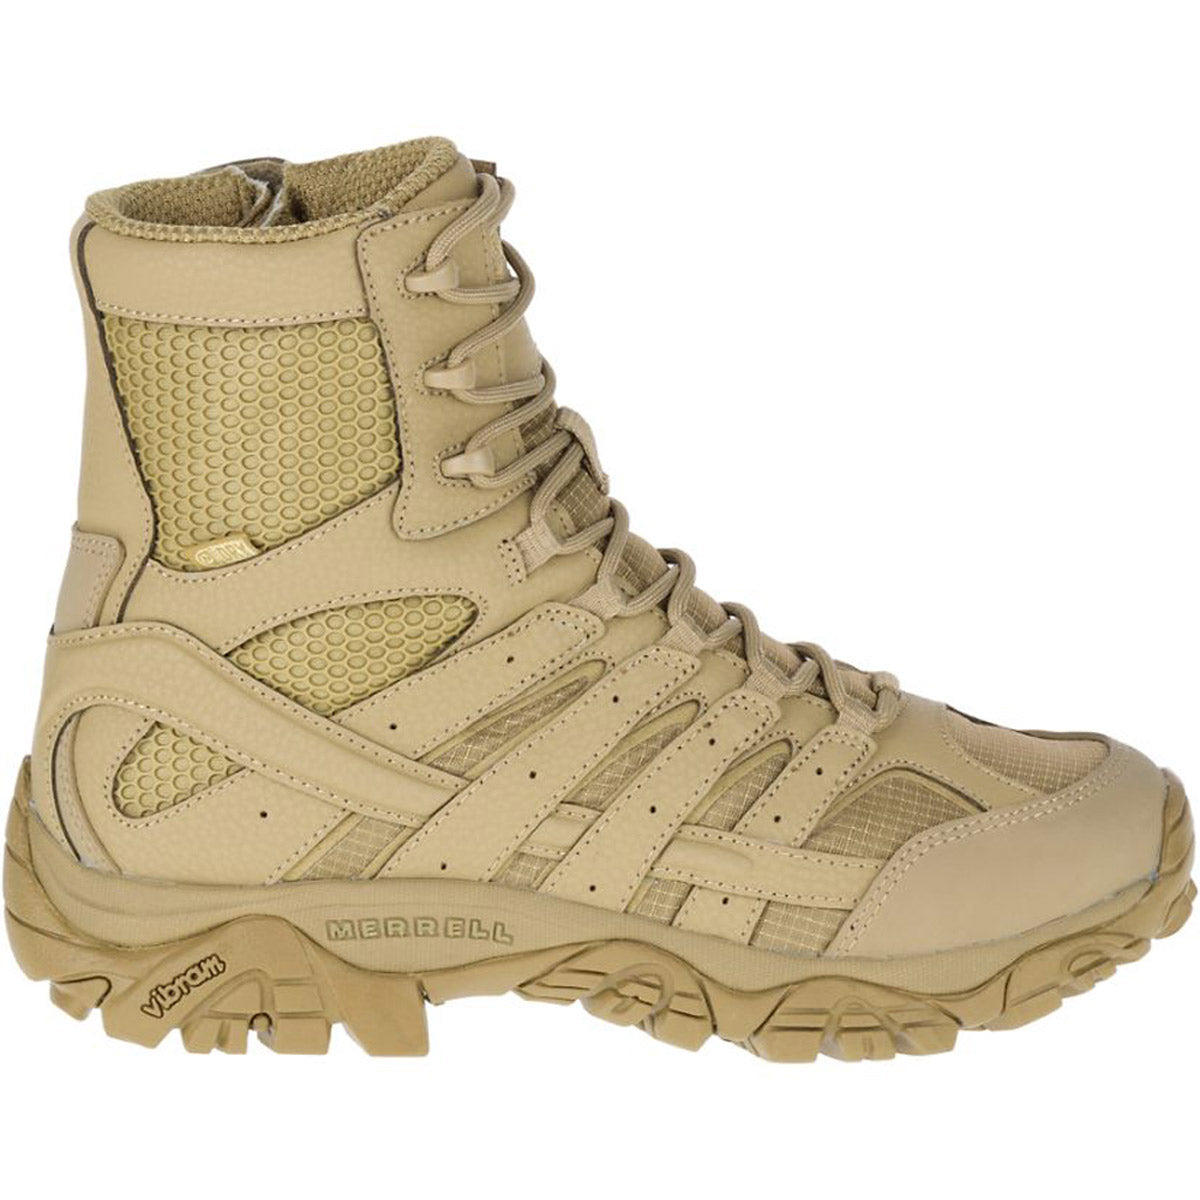 A tan, high-top Merrell MOAB 2 8" Tactical WP Coyote boot with lace-up front and ventilated side panels.